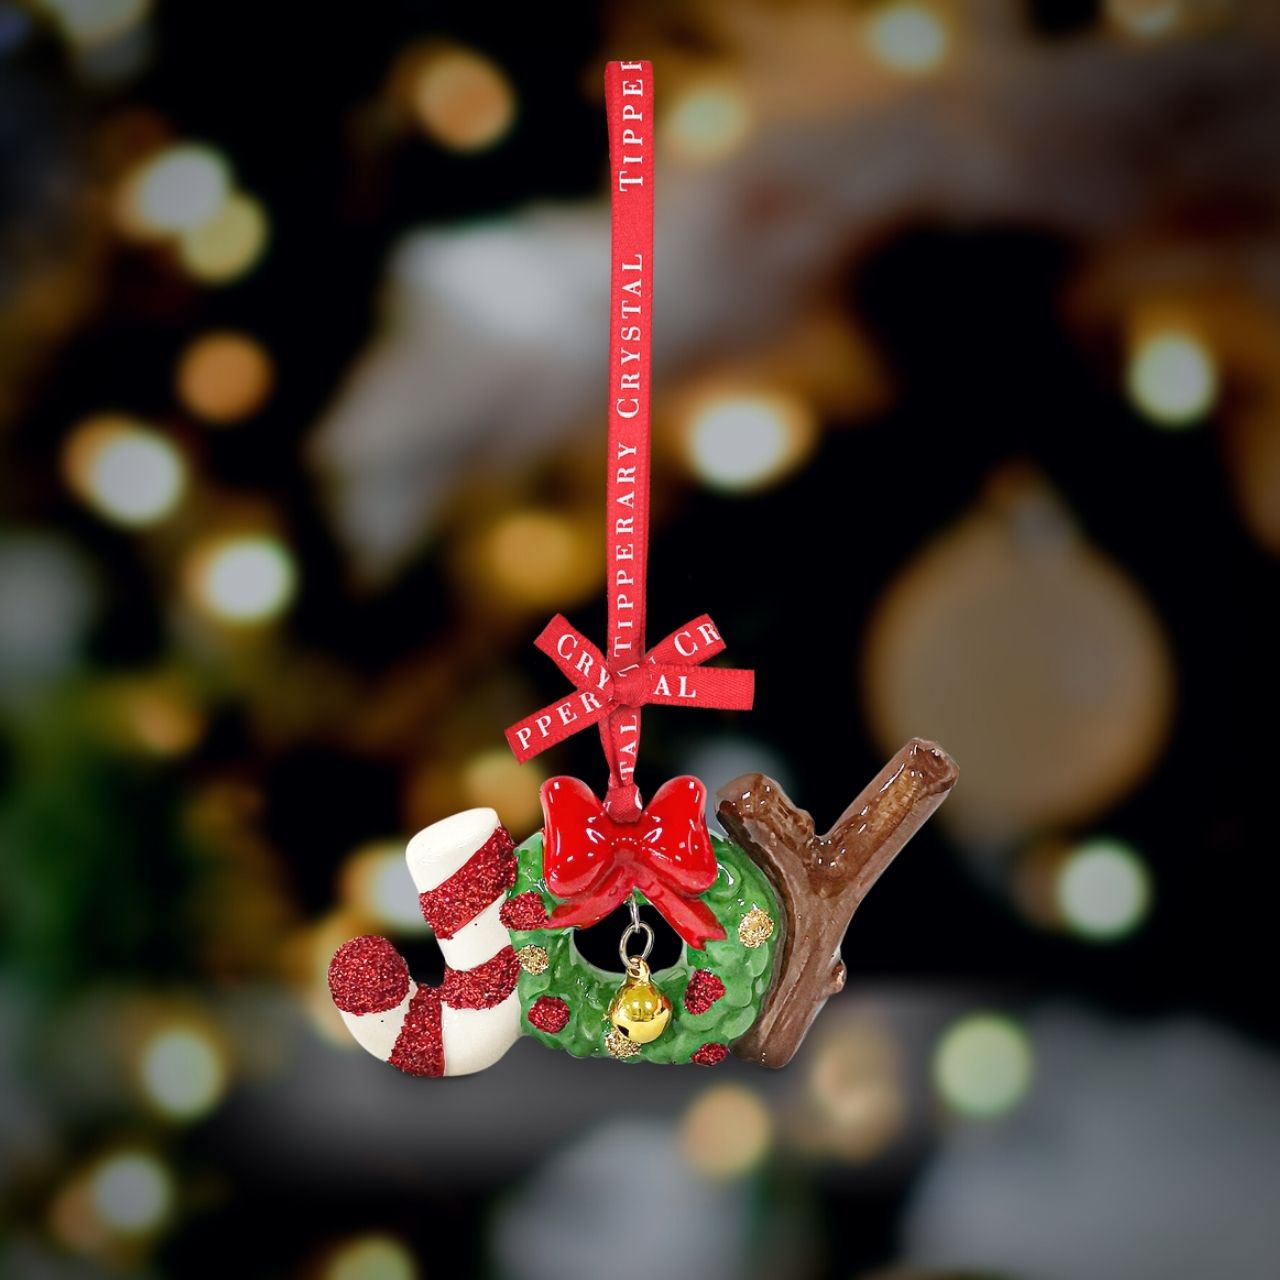 Porcelain Decoration - Joy Christmas Ornament - NEW 2022  We just Love Christmas! The festive season, the giving of gifts, creating memories and being together with family and loved ones. Have lots of fun with our lovingly designed and created Christmas decorations, each one has a magic sparkle of elf dust!